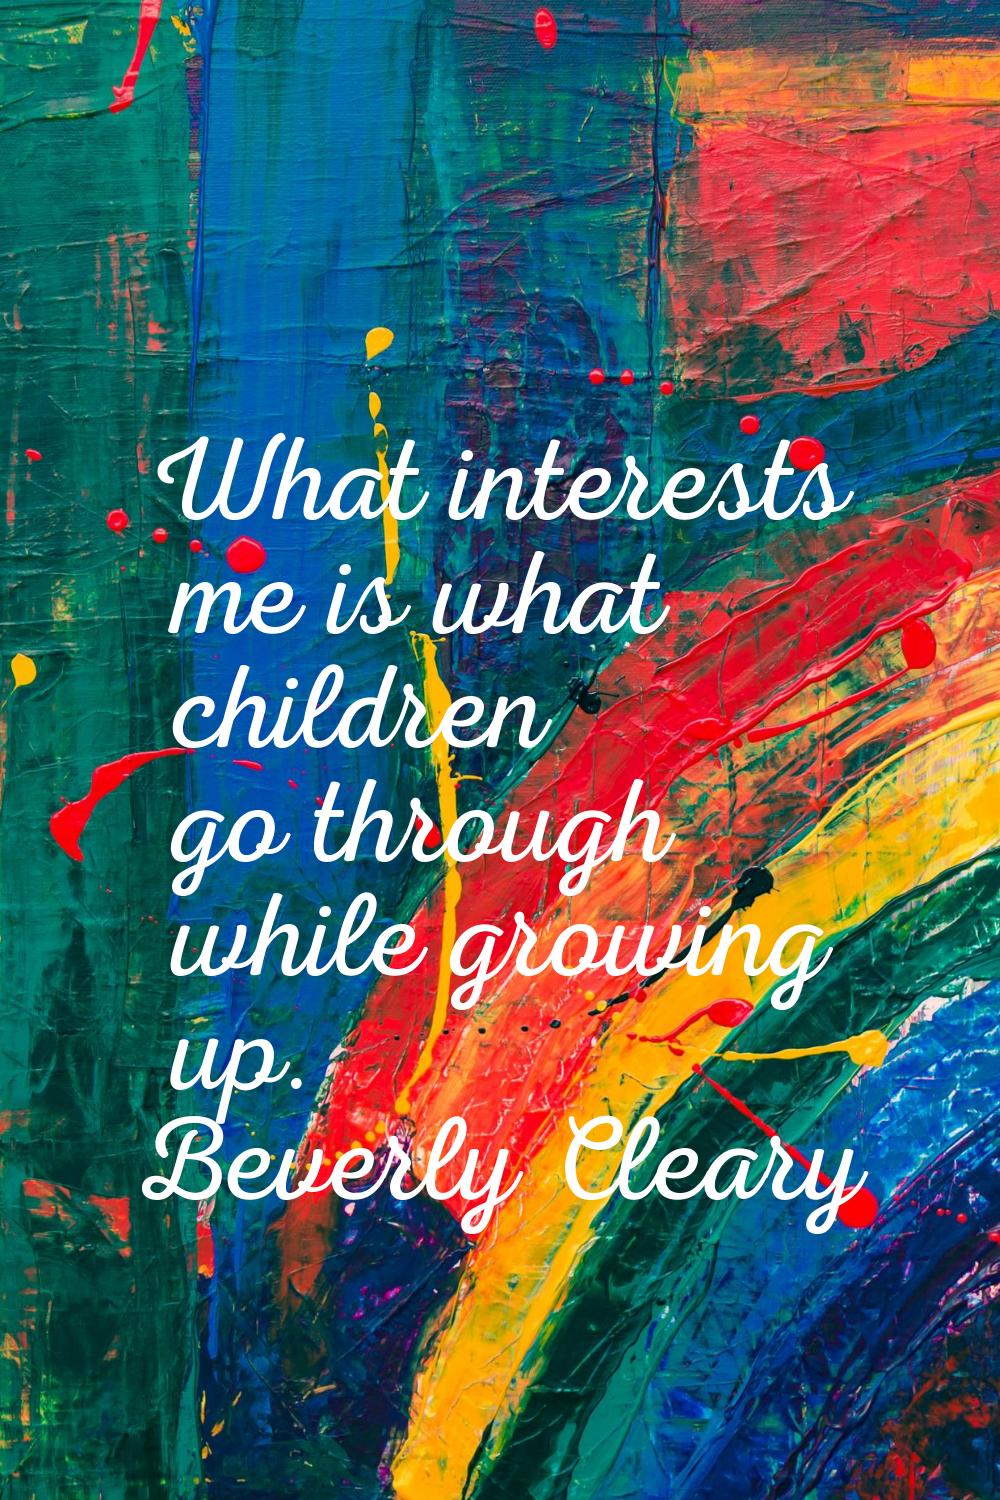 What interests me is what children go through while growing up.